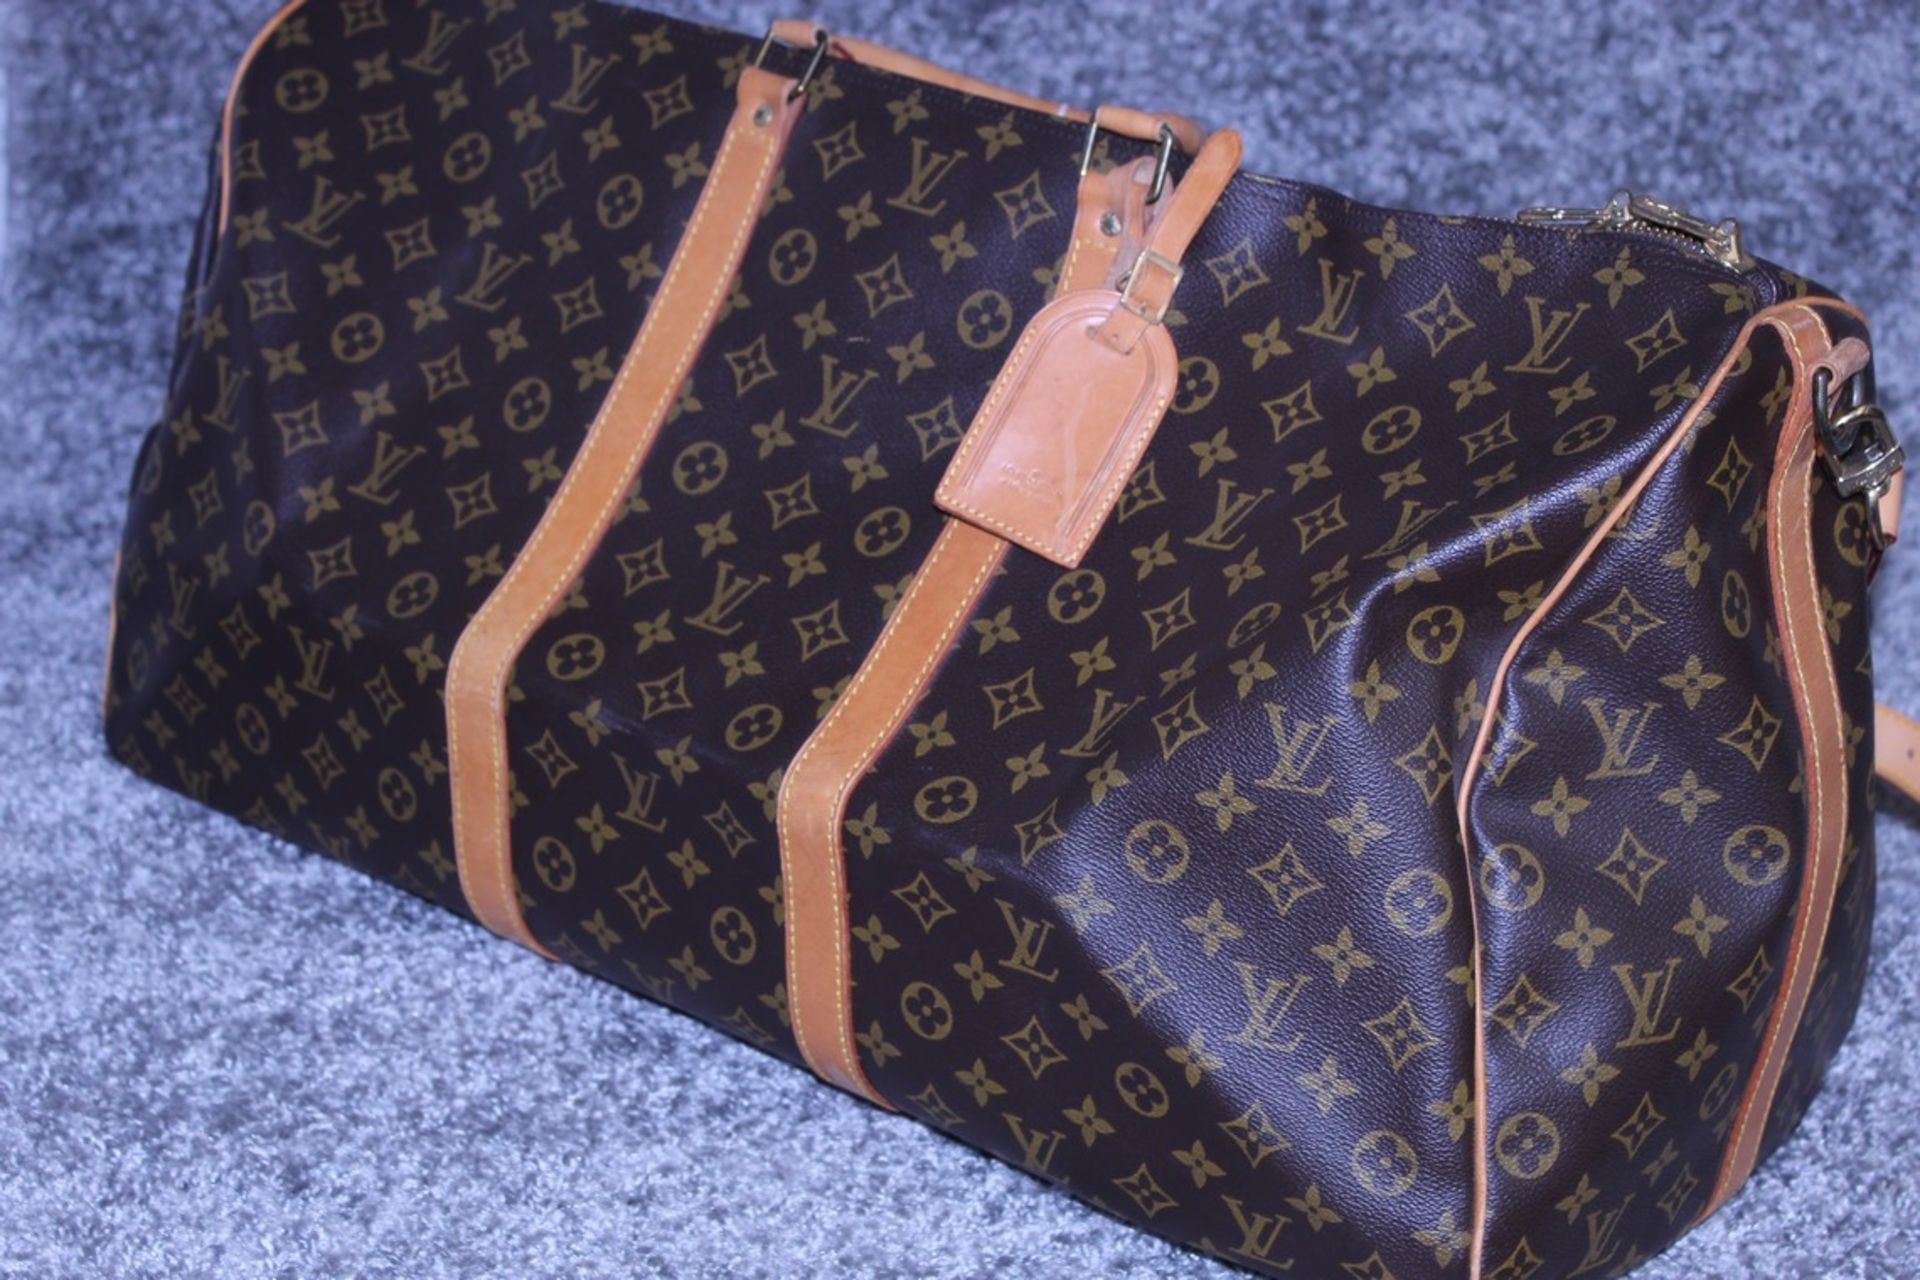 Rrp £1,800 Louis Vuitton Keepall Bandouliere Travel Bag - Image 3 of 5